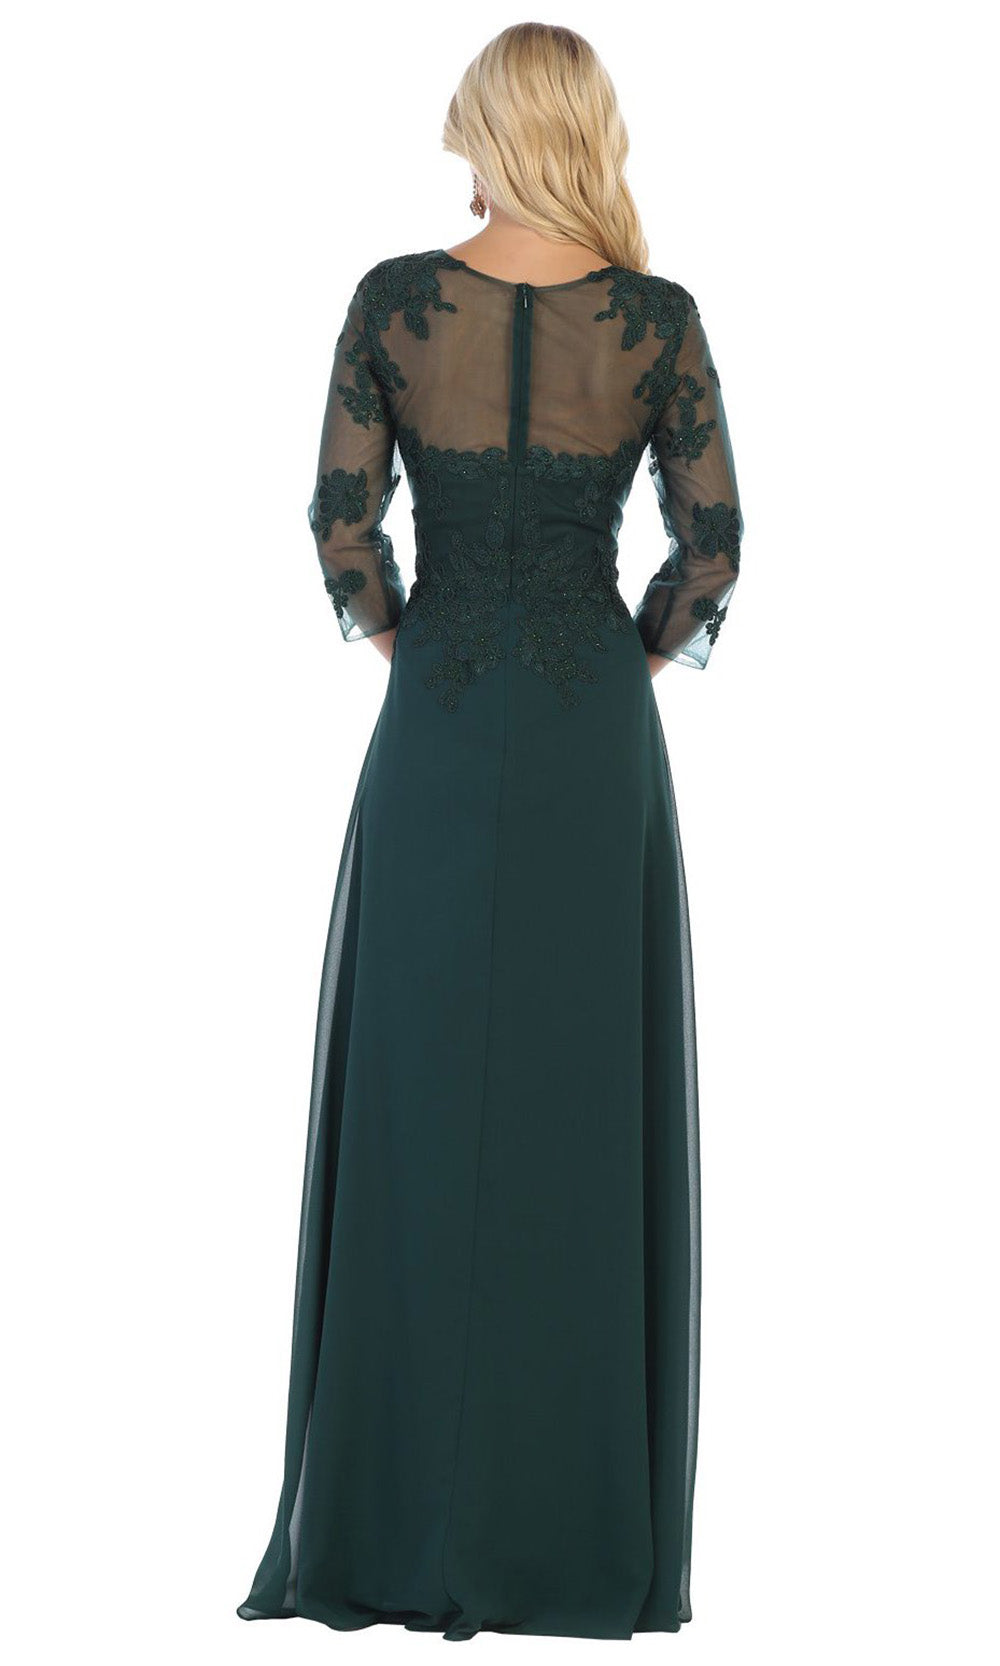 May Queen - MQ1637 Illusion Quarter Sleeve Long Dress In Green